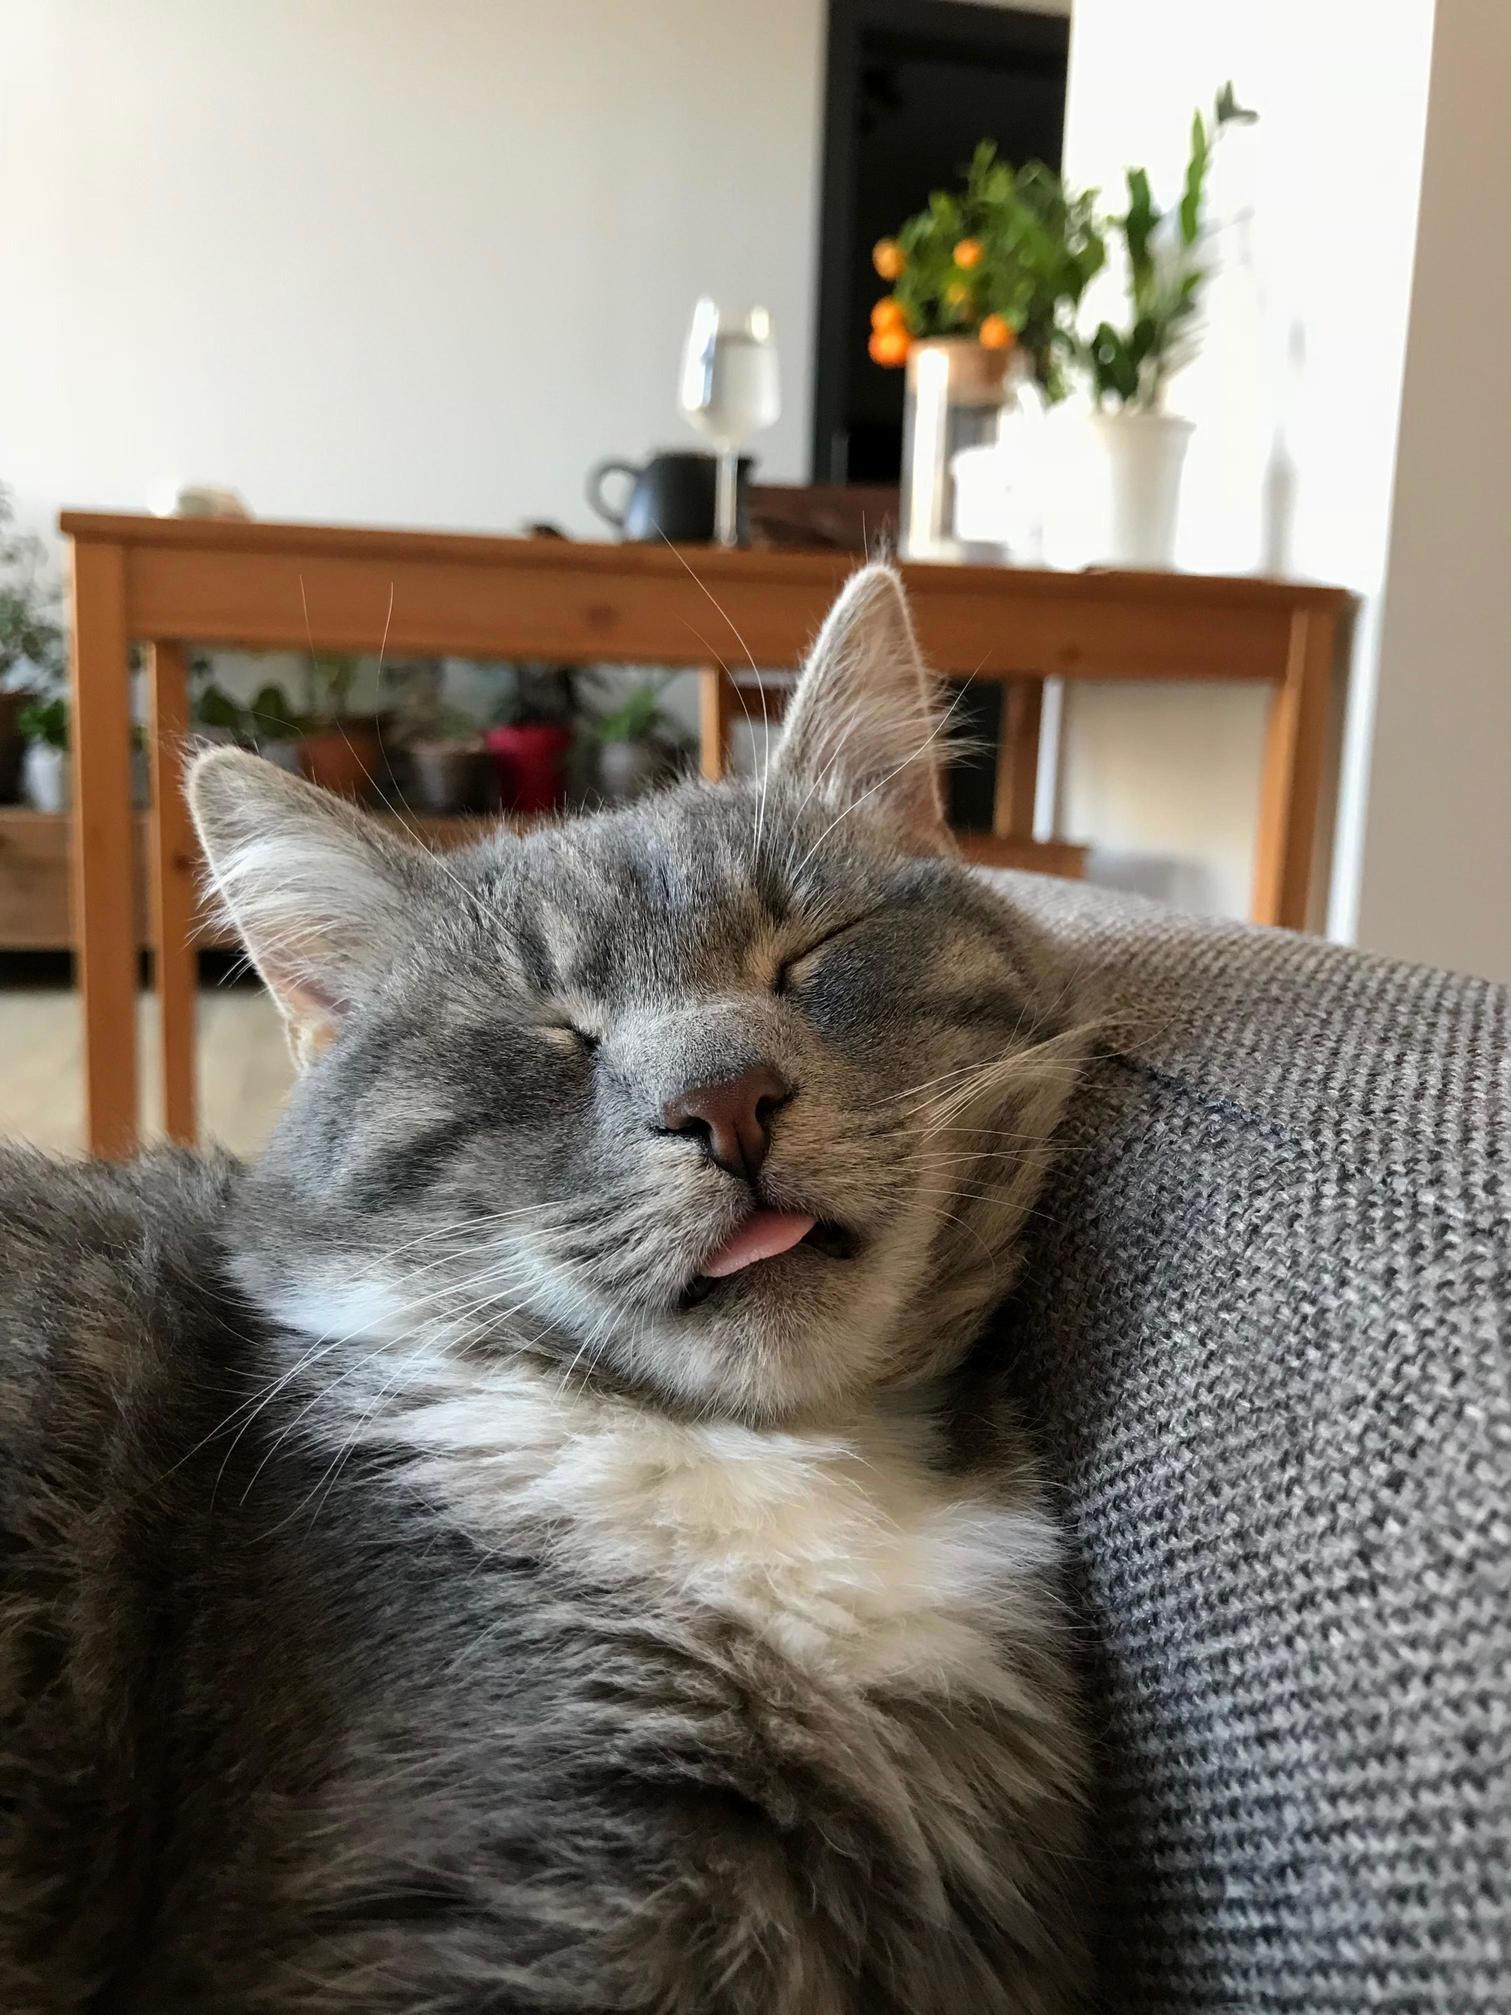 My kitty murmur loves napping with her tongue out